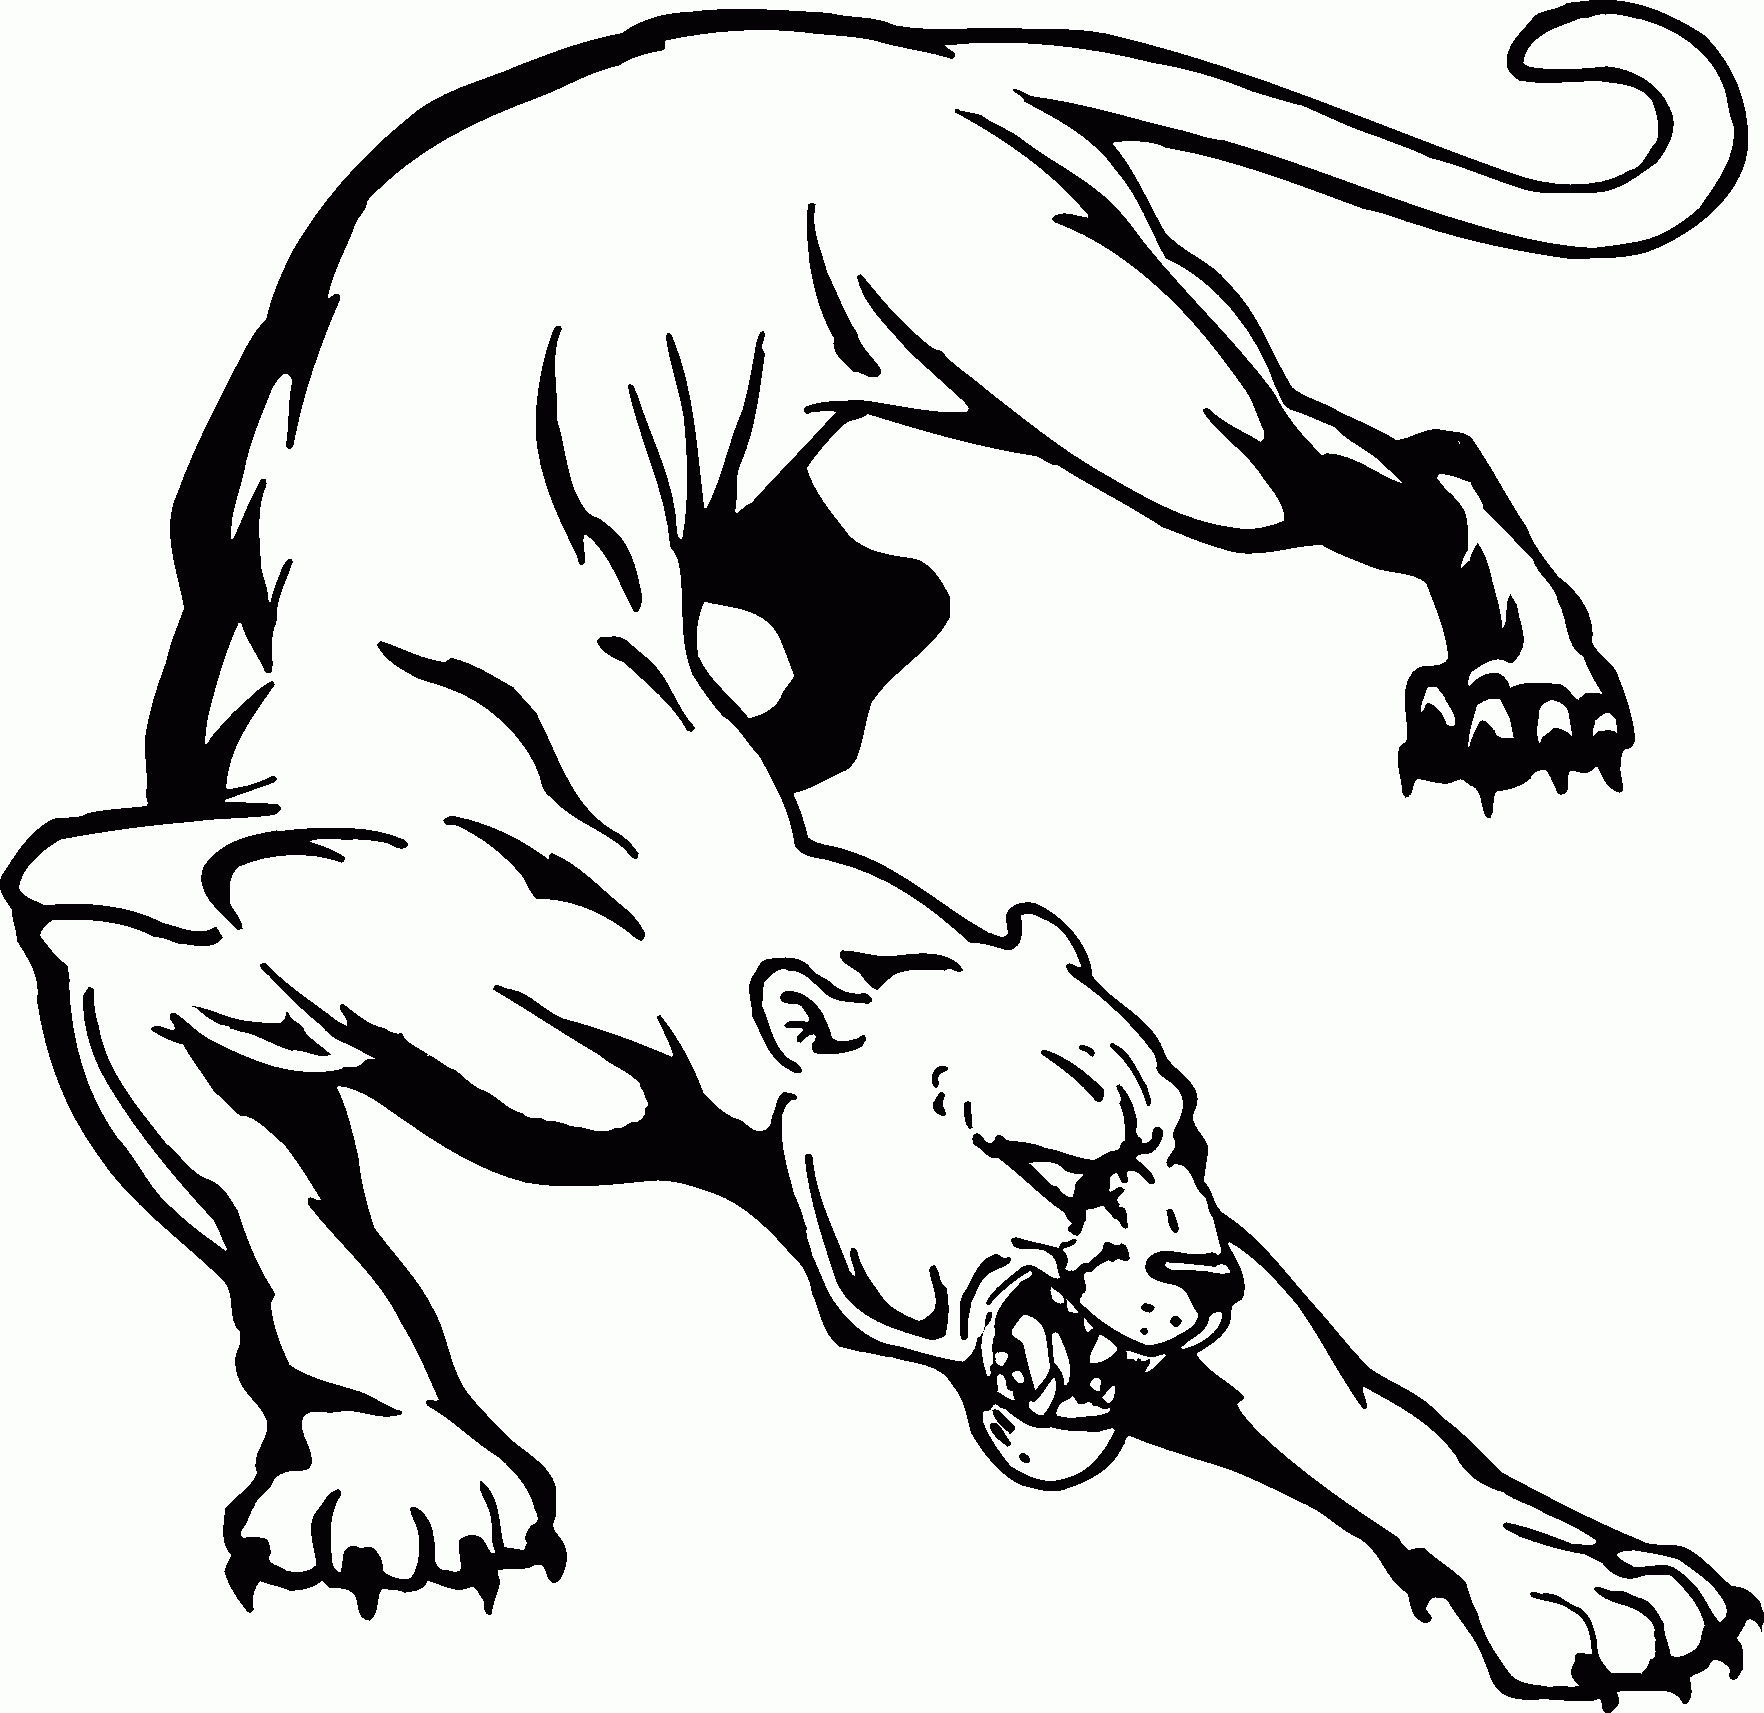 Panther clipart black and white » Clipart Station.